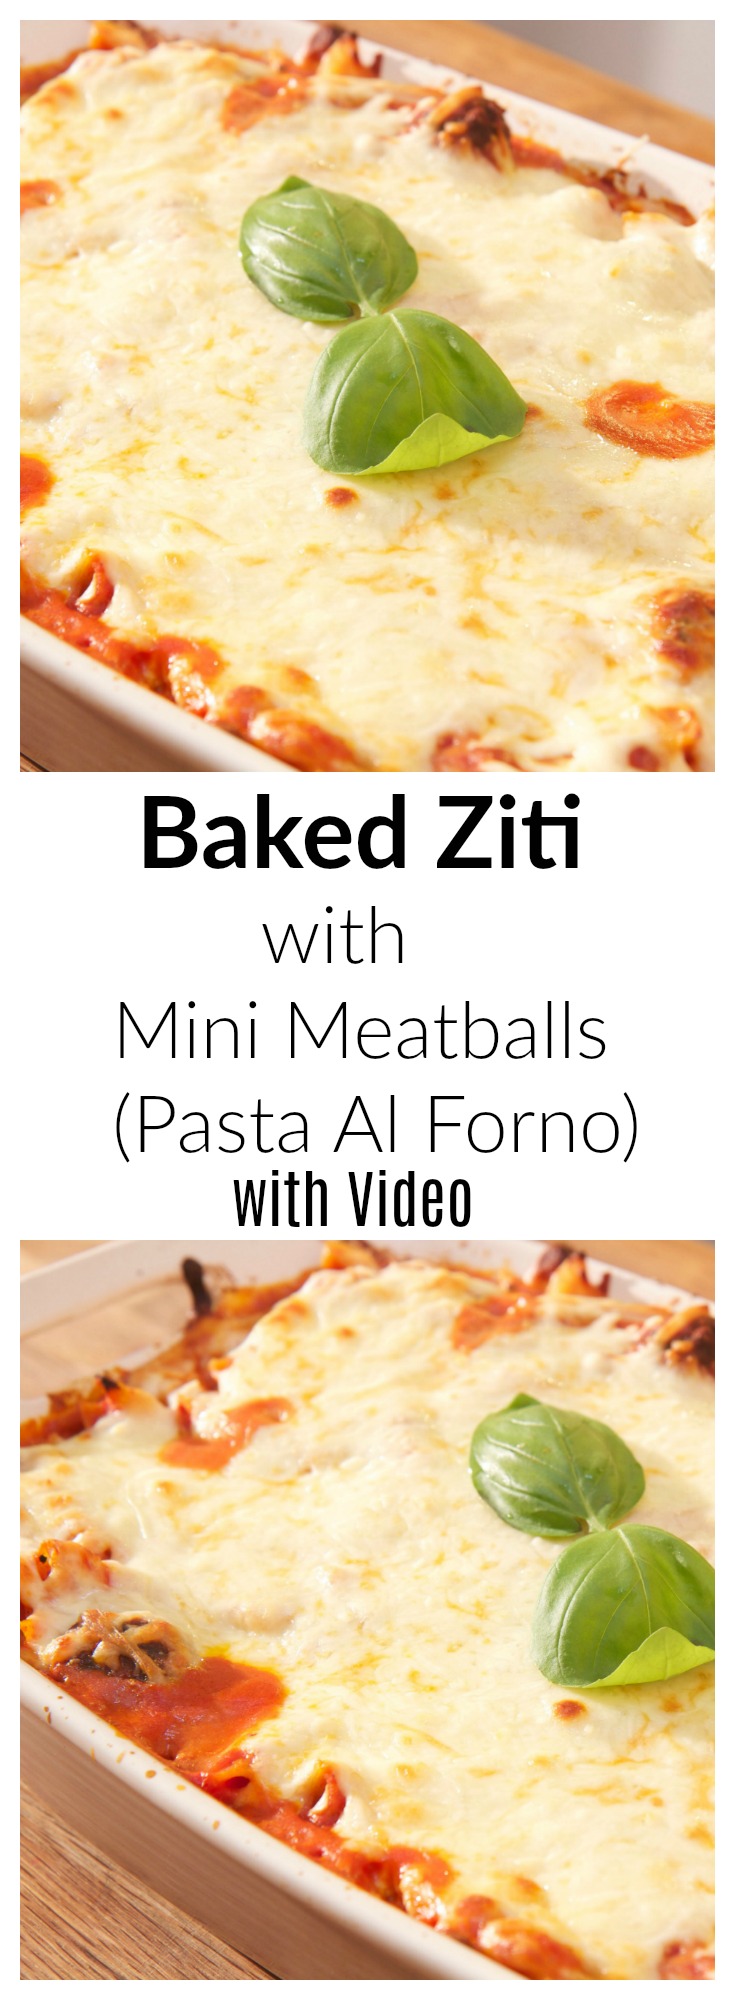 Baked Ziti with Mini Meatballs - recipe with video